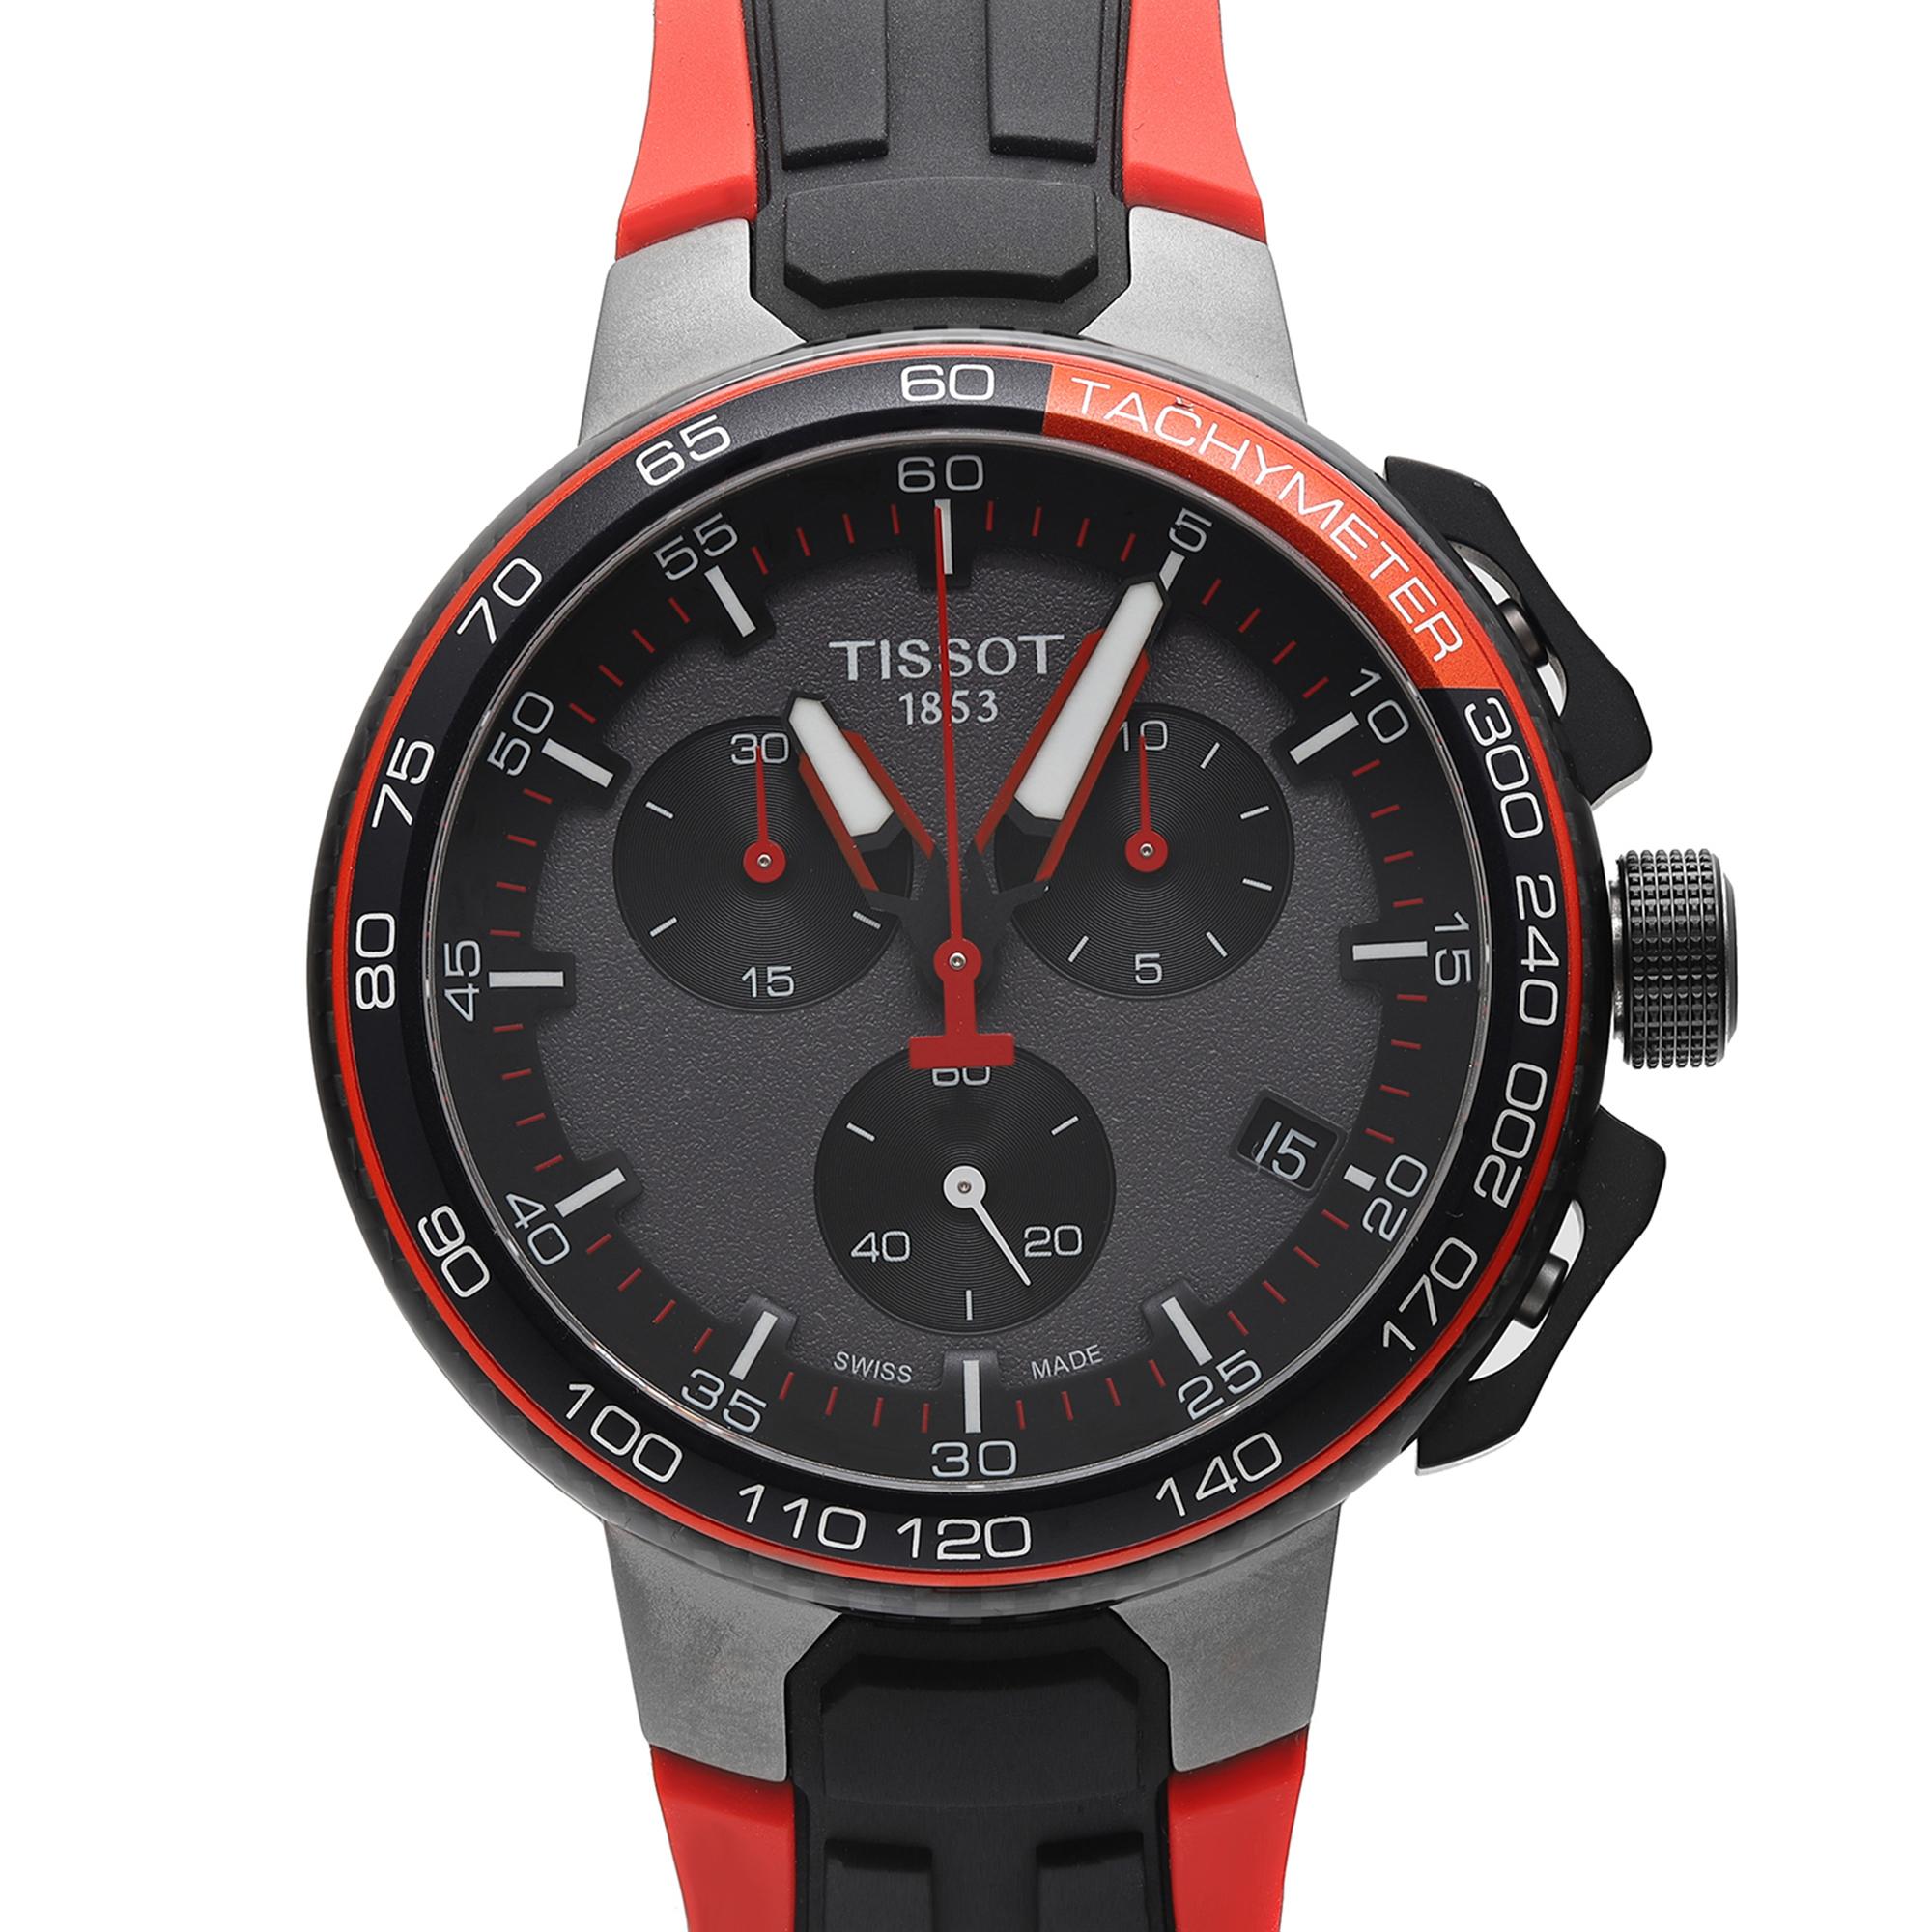 New with Defects Tissot T-Race Men's Watch T111.417.37.441.01. It has a minor dent on the bezel insert over the 